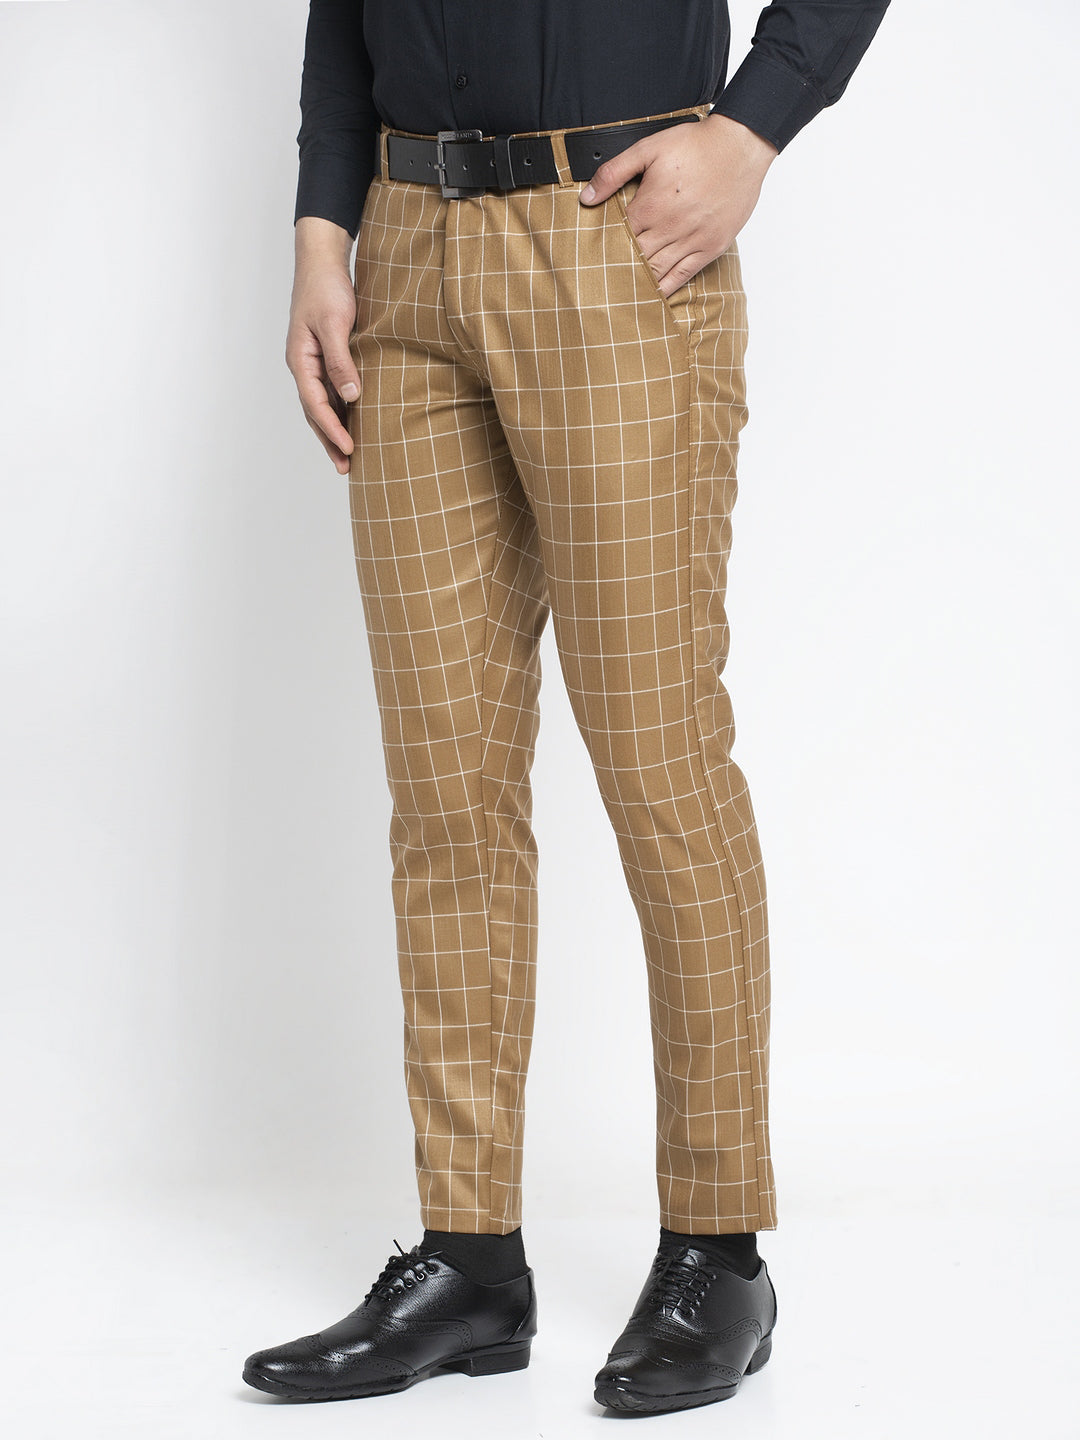 Buy Chocolate Brown Trousers  Pants for Men by The Indian Garage Co Online   Ajiocom